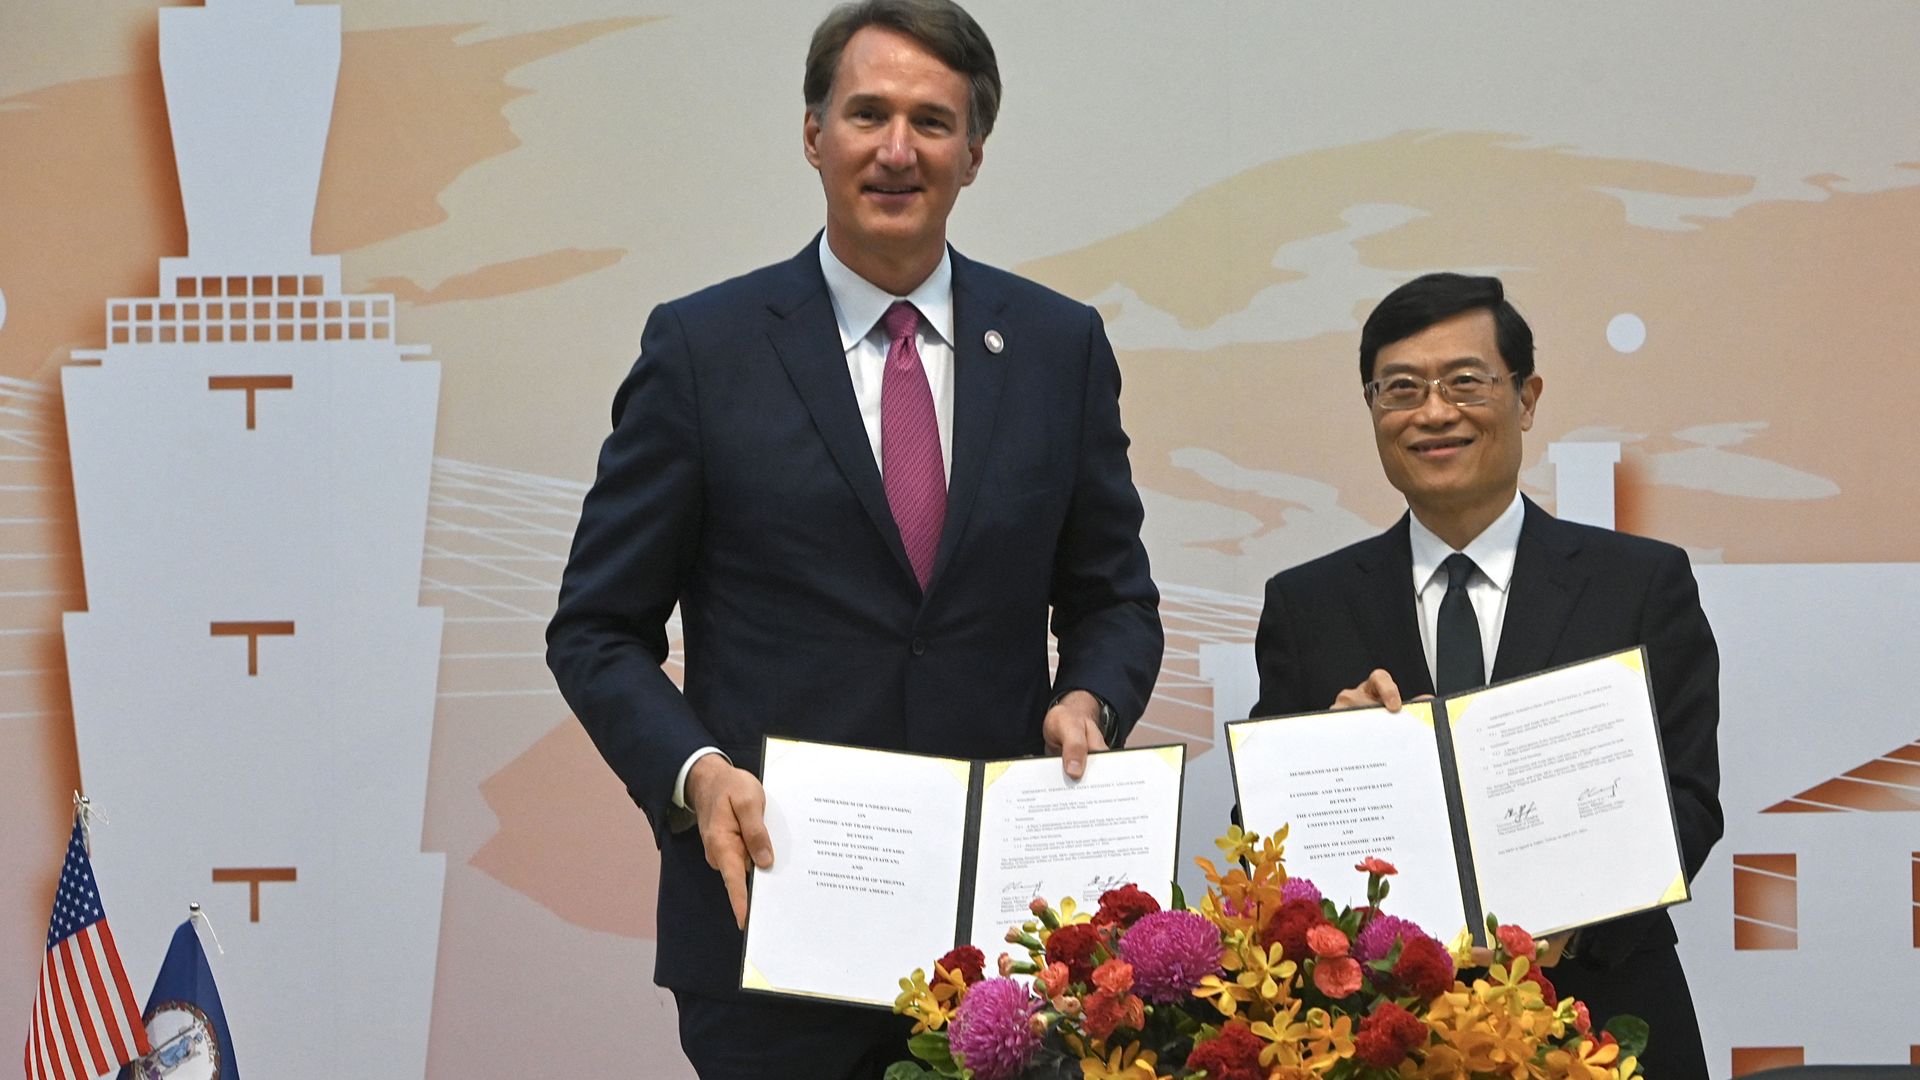 Virginia Governor Glenn Youngkin (L) poses for a photo with Taiwan's Deputy Economic Minister Chen Chern-chi during a signing ceremony at the Ministry of Foreign Affairs (MOFA) in Taipei on April 25, 2023